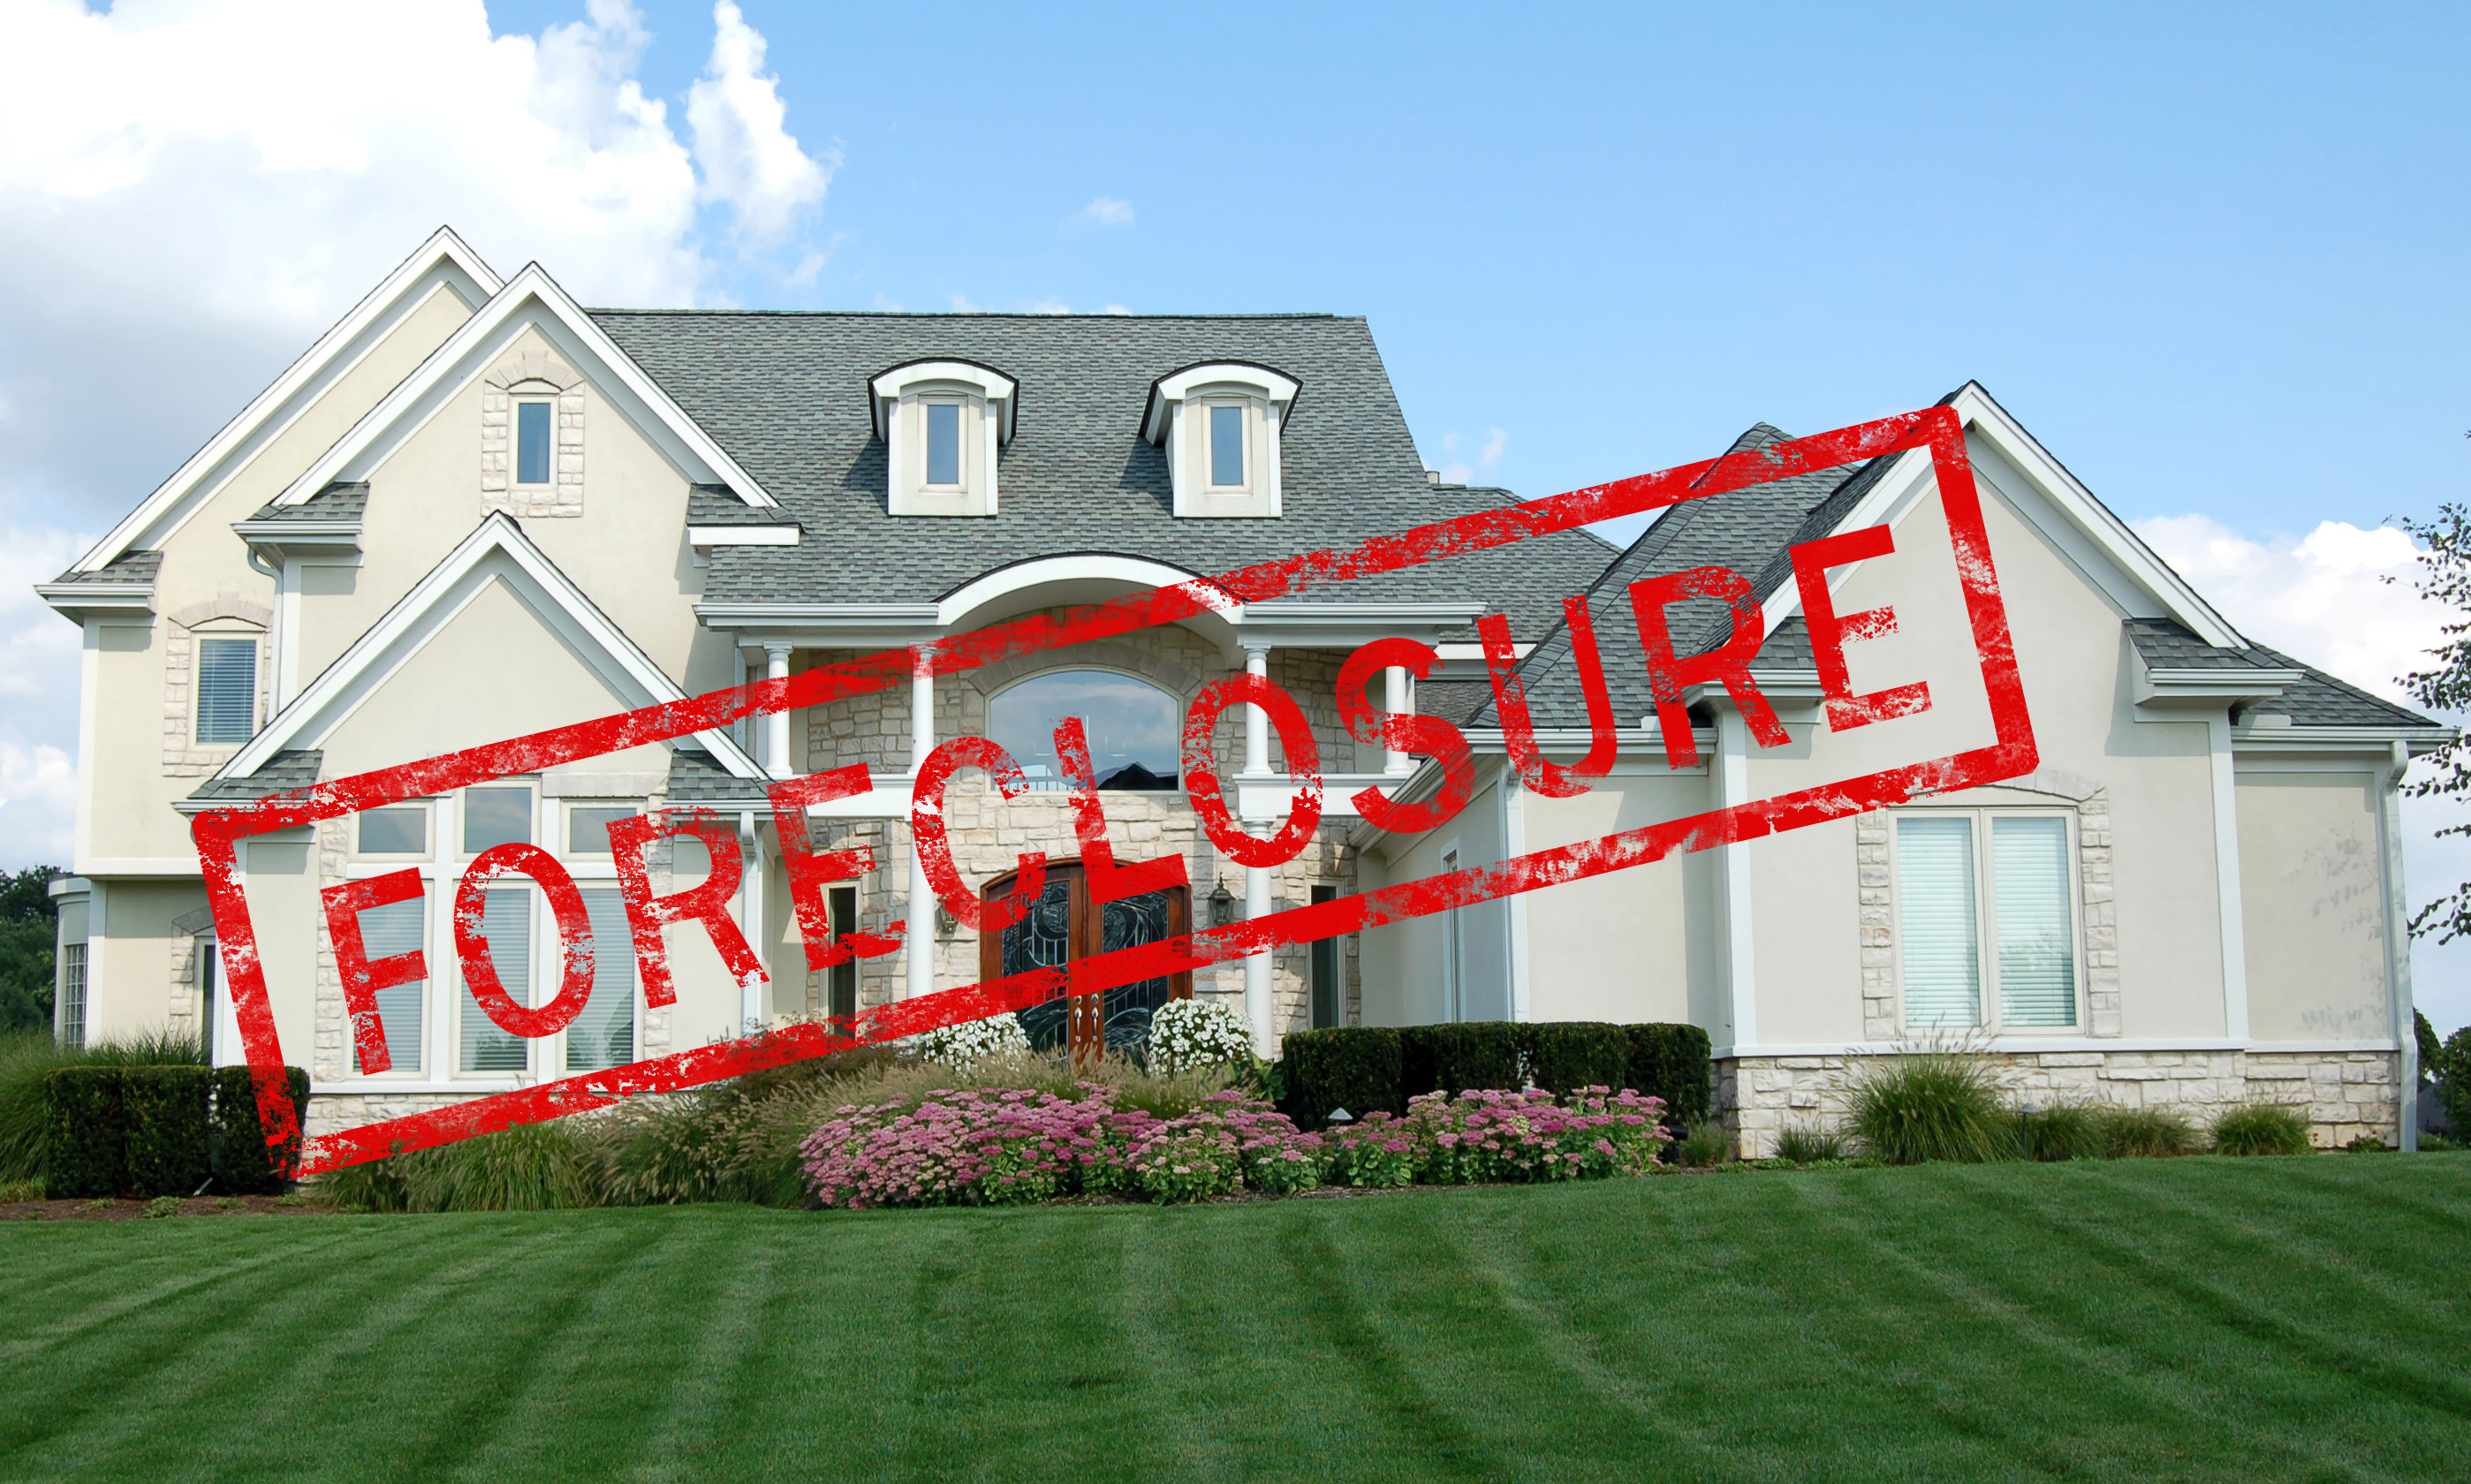 Call Valicity LLC when you need valuations regarding Humboldt foreclosures